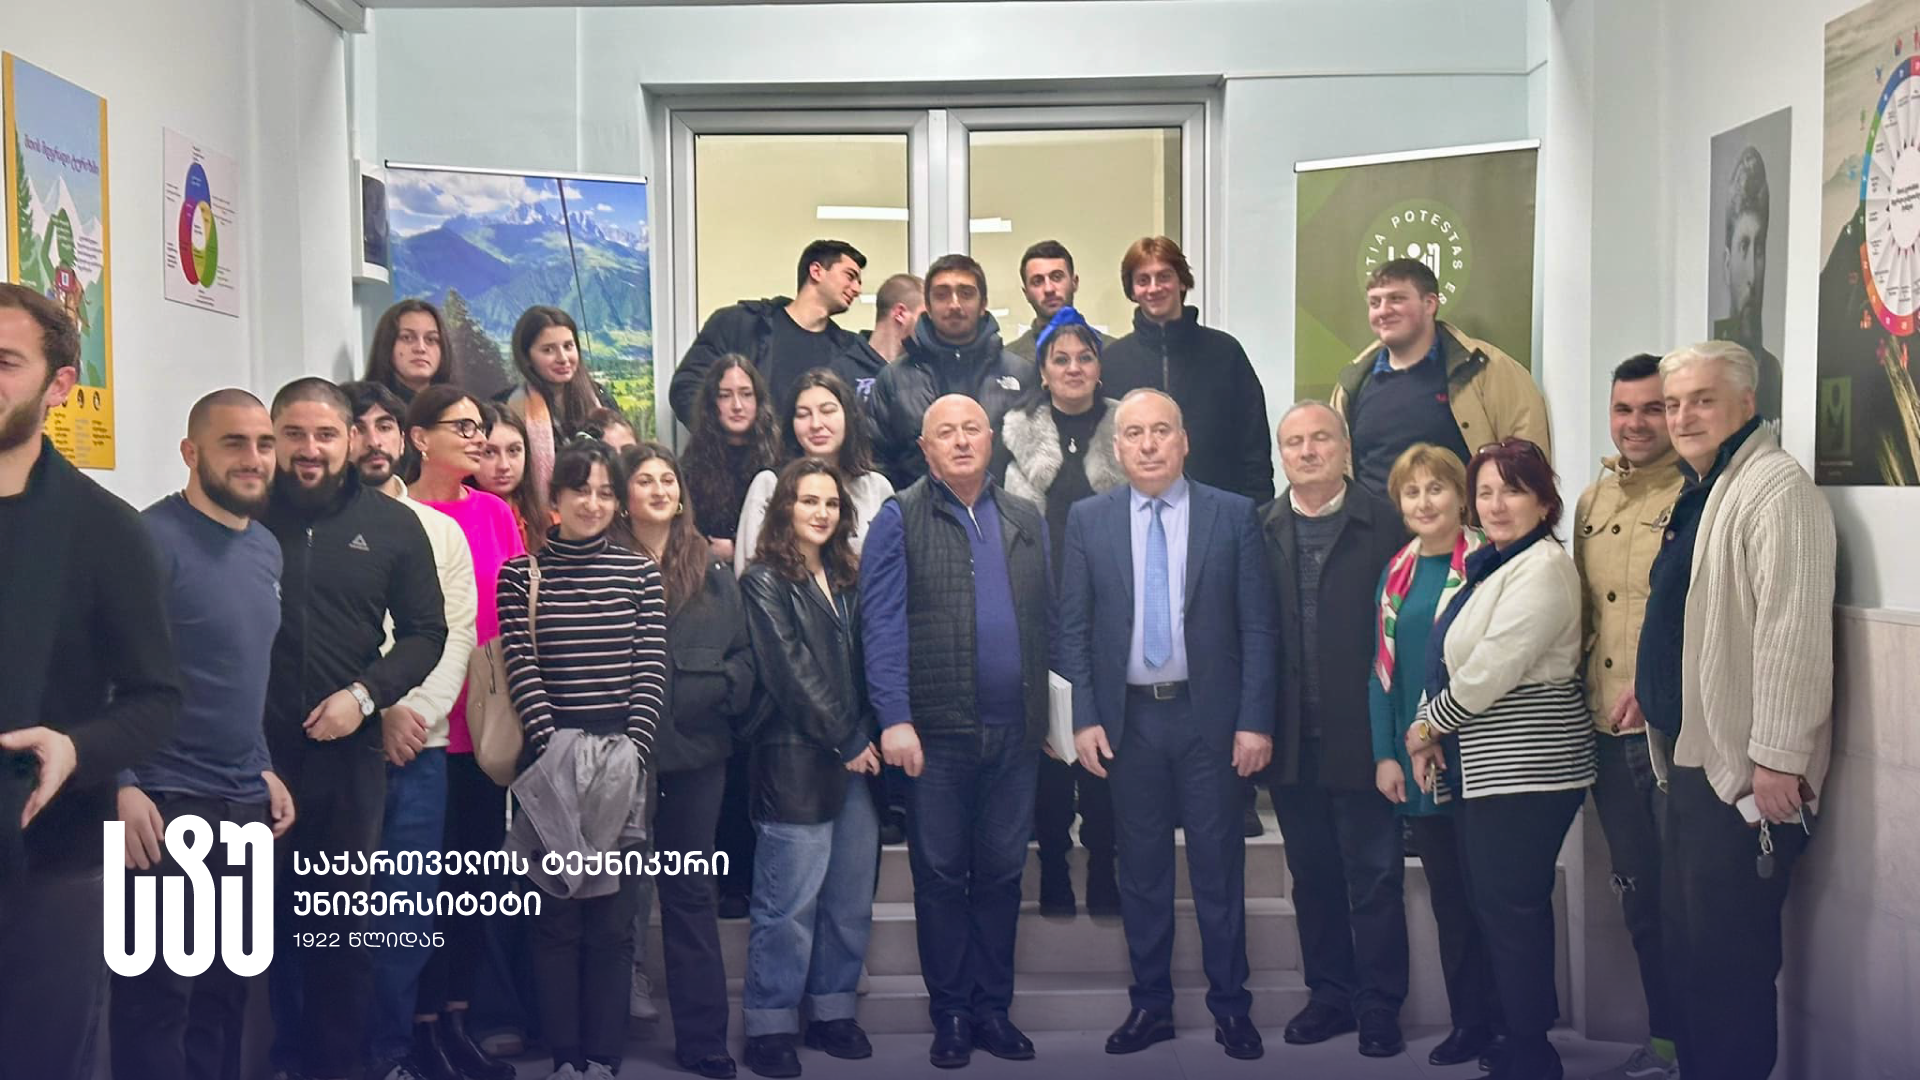 Solomon Pavliashvili held a public lecture at the Faculty of Mountain Sustainable Development of GTU